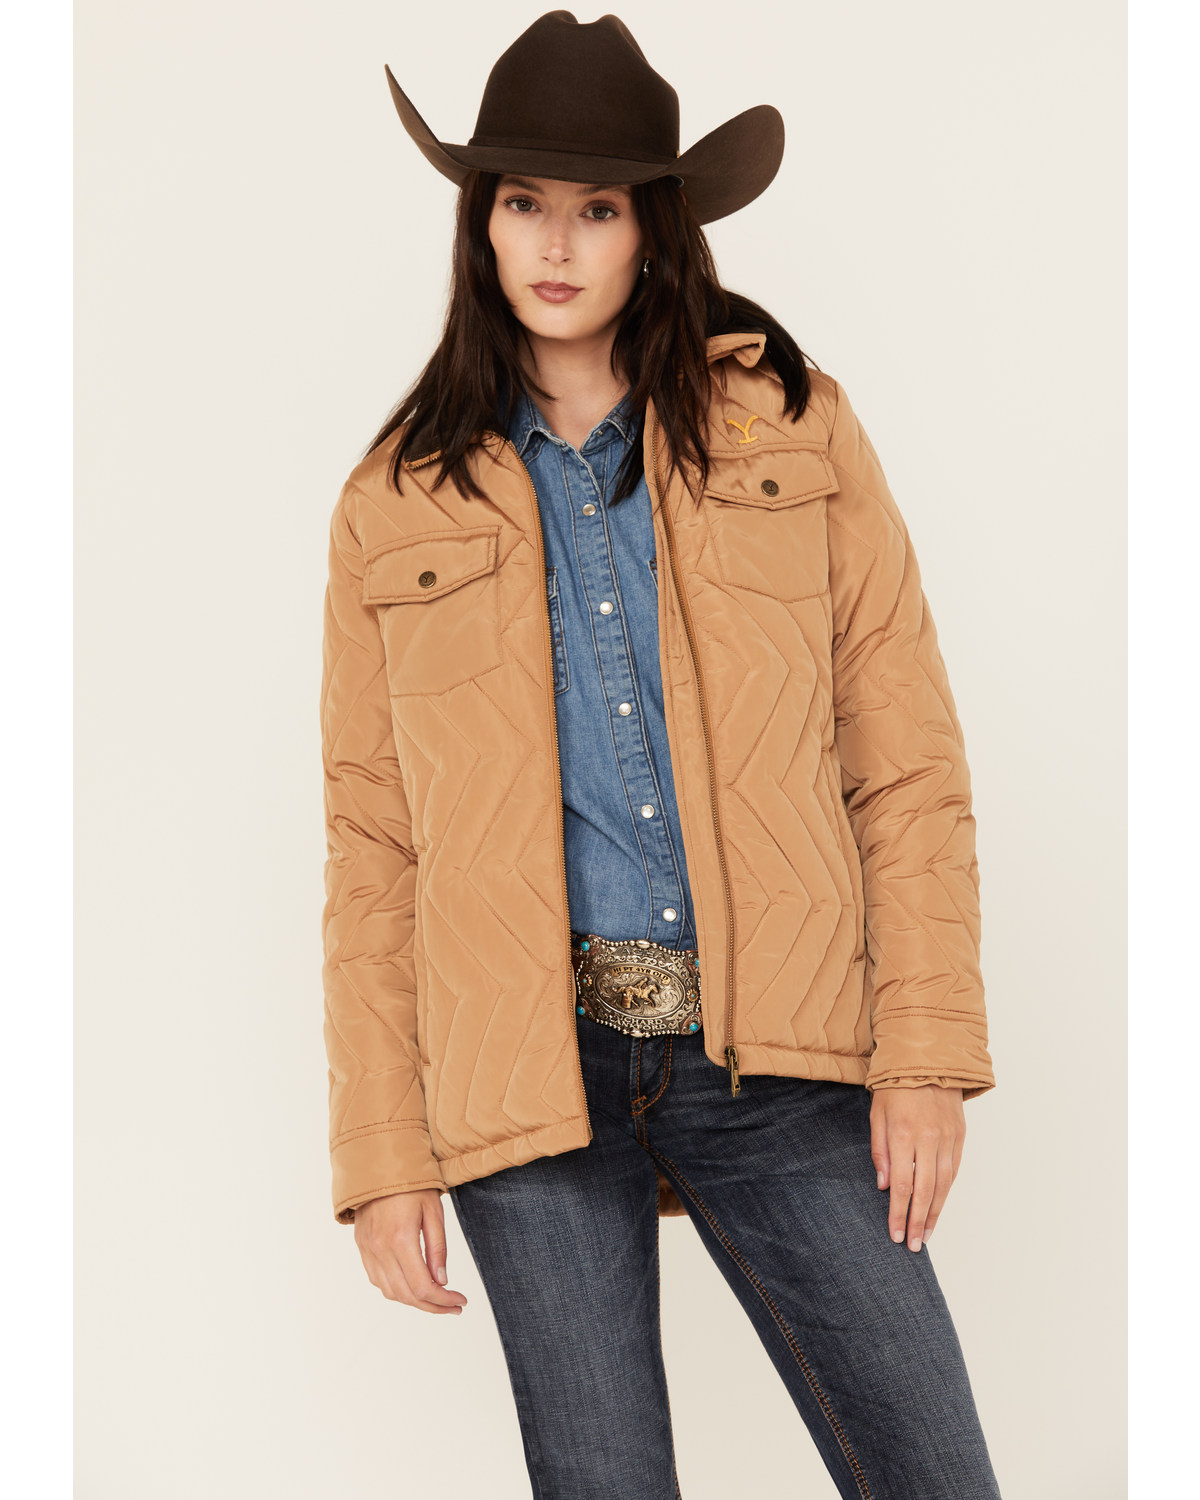 Paramount Network's Yellowstone Women's Quilted Barn Coat